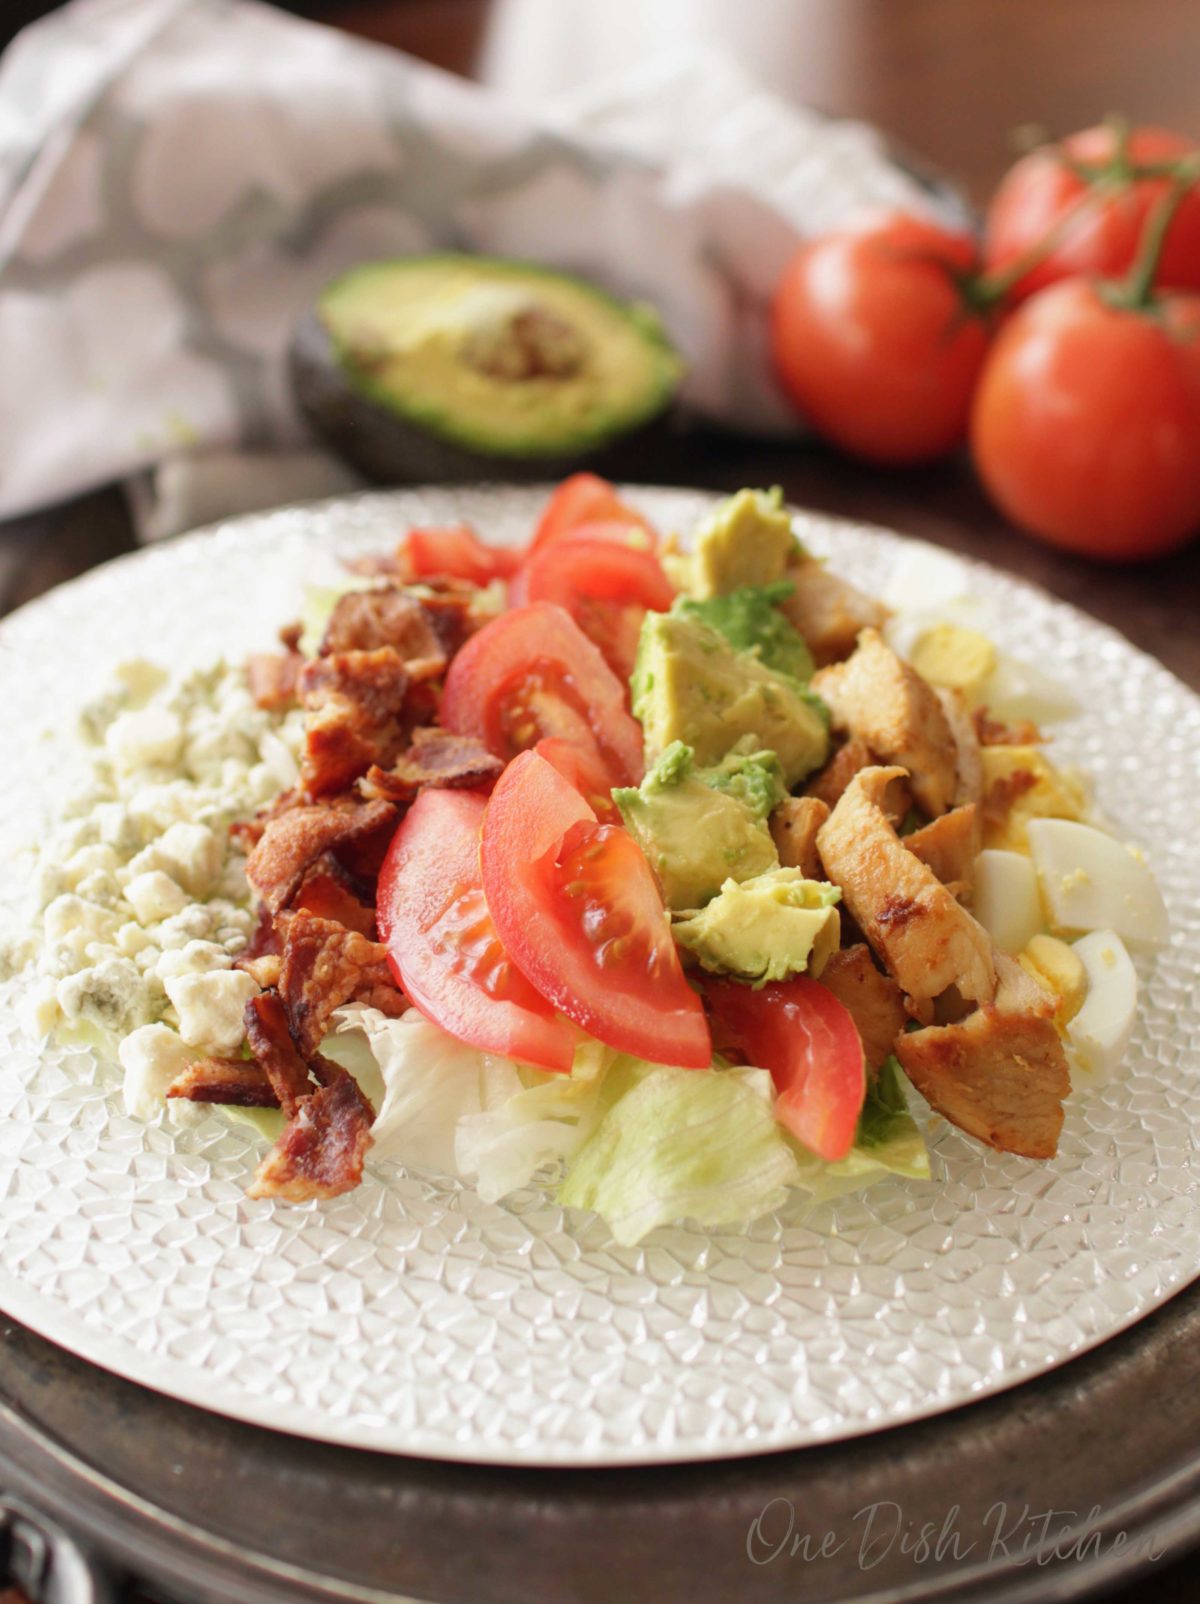 a plate filled with lettuce, tomatoes, blue cheese, avocados, and crumbled bacon